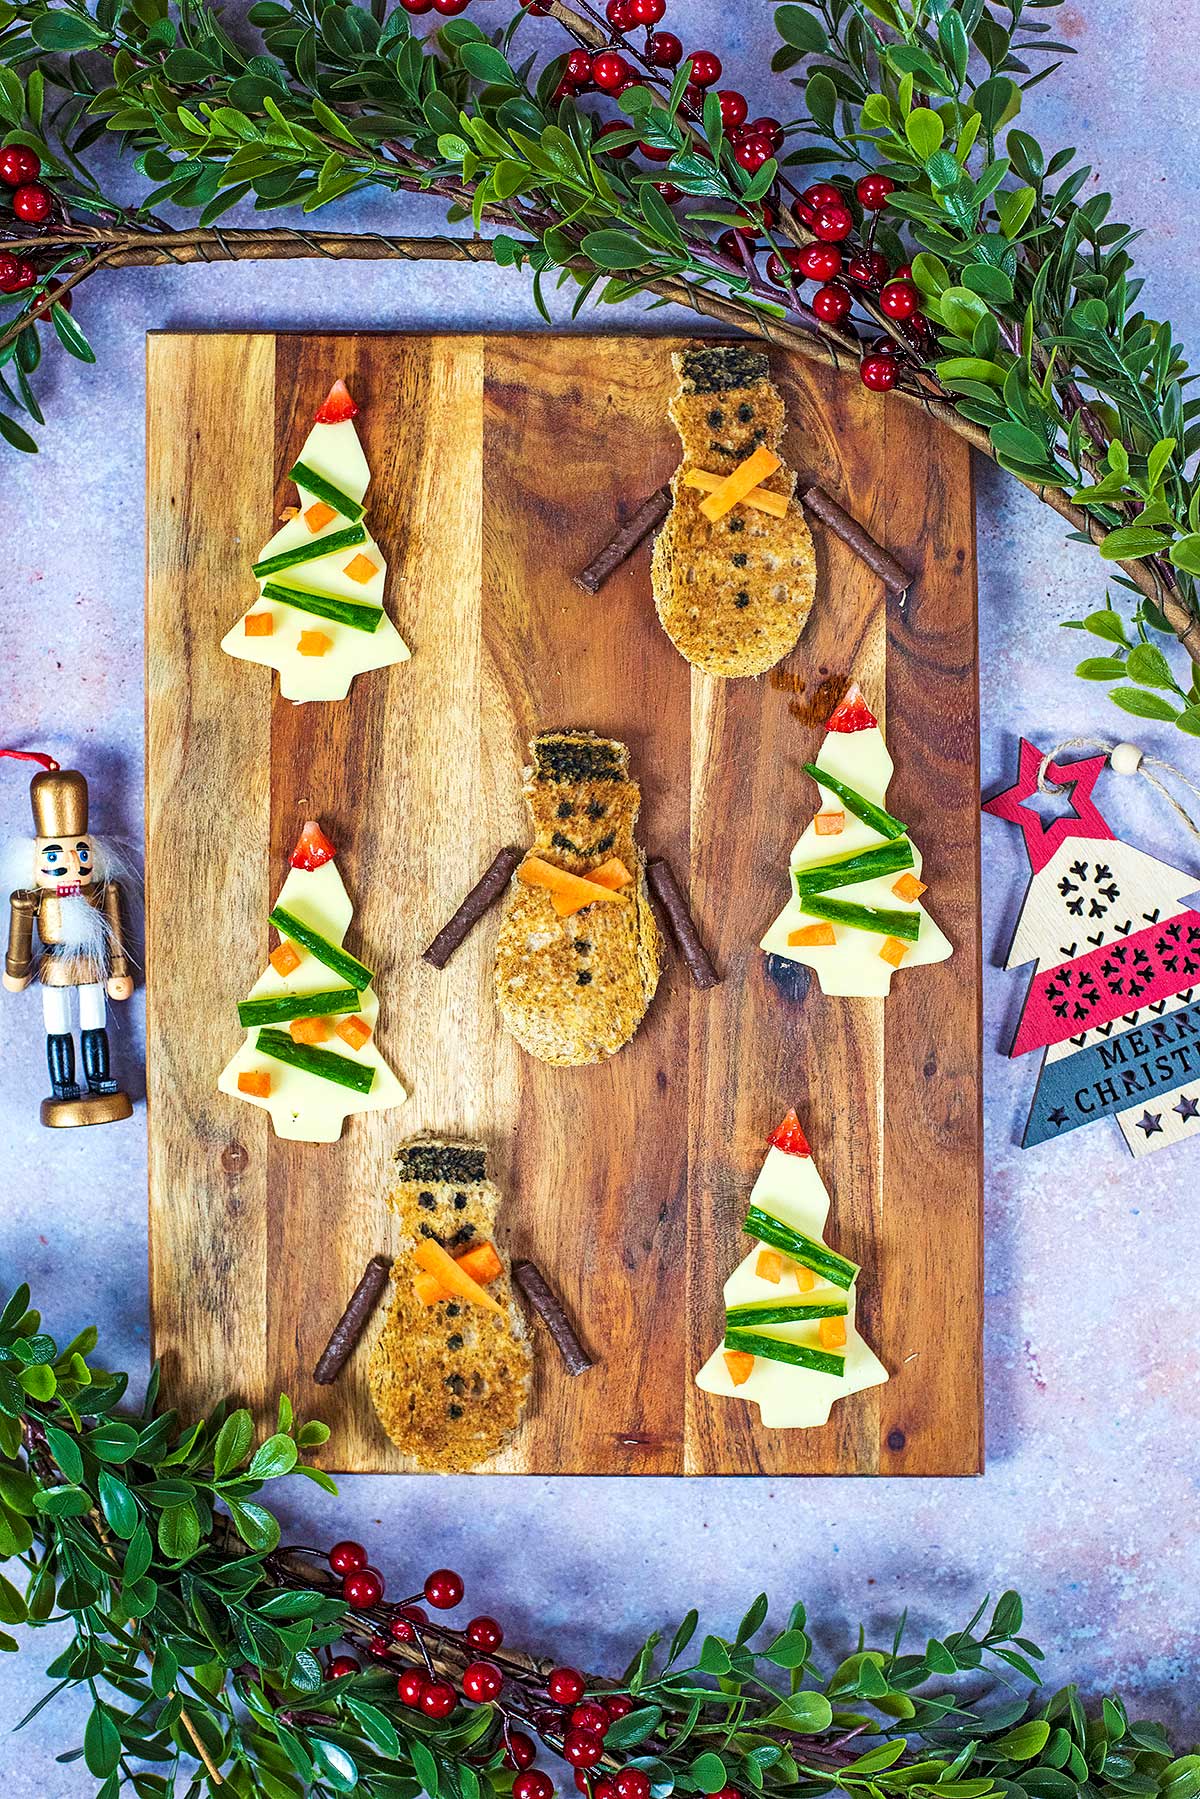 Slices of toast cut into a snowman shape with slices of cheese in tree shaped.